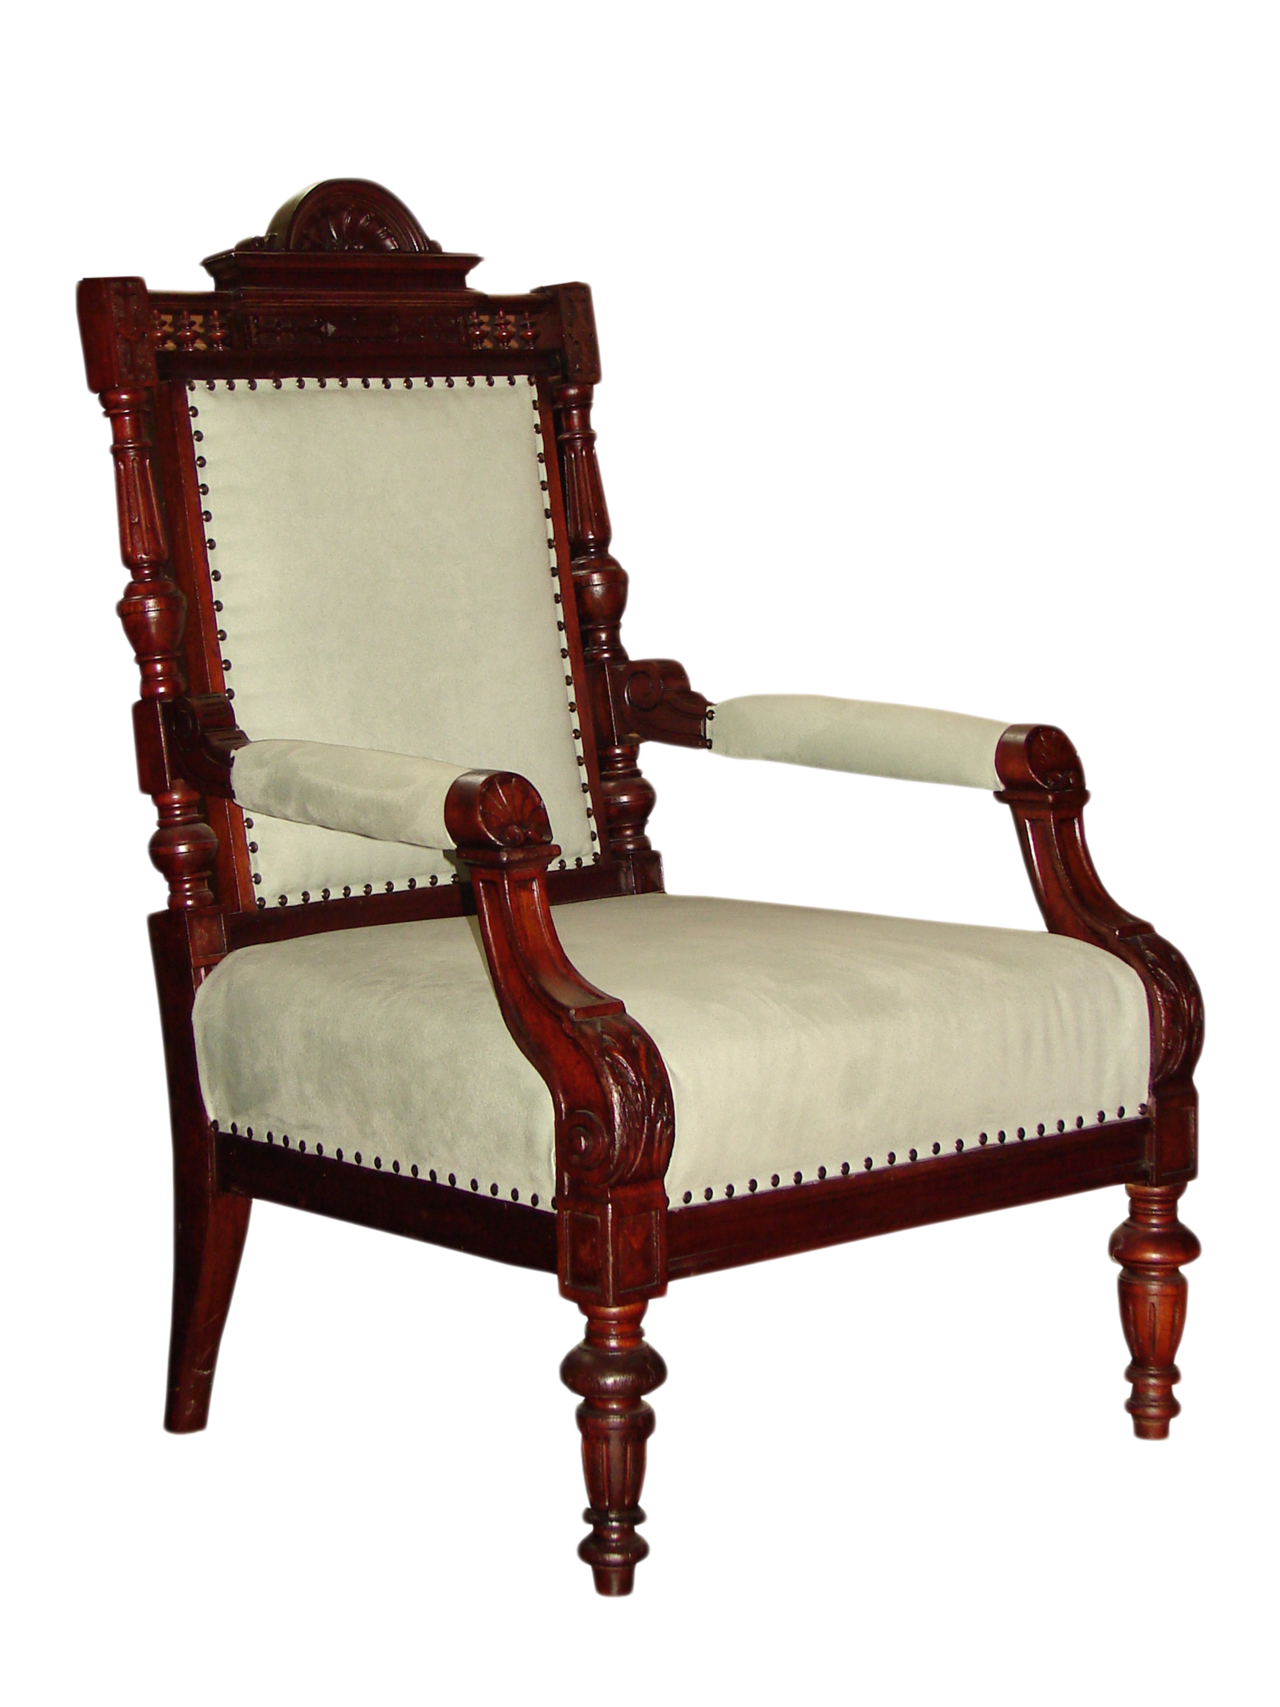 Download PNG image - Wooden Antique Chair Transparent PNG 